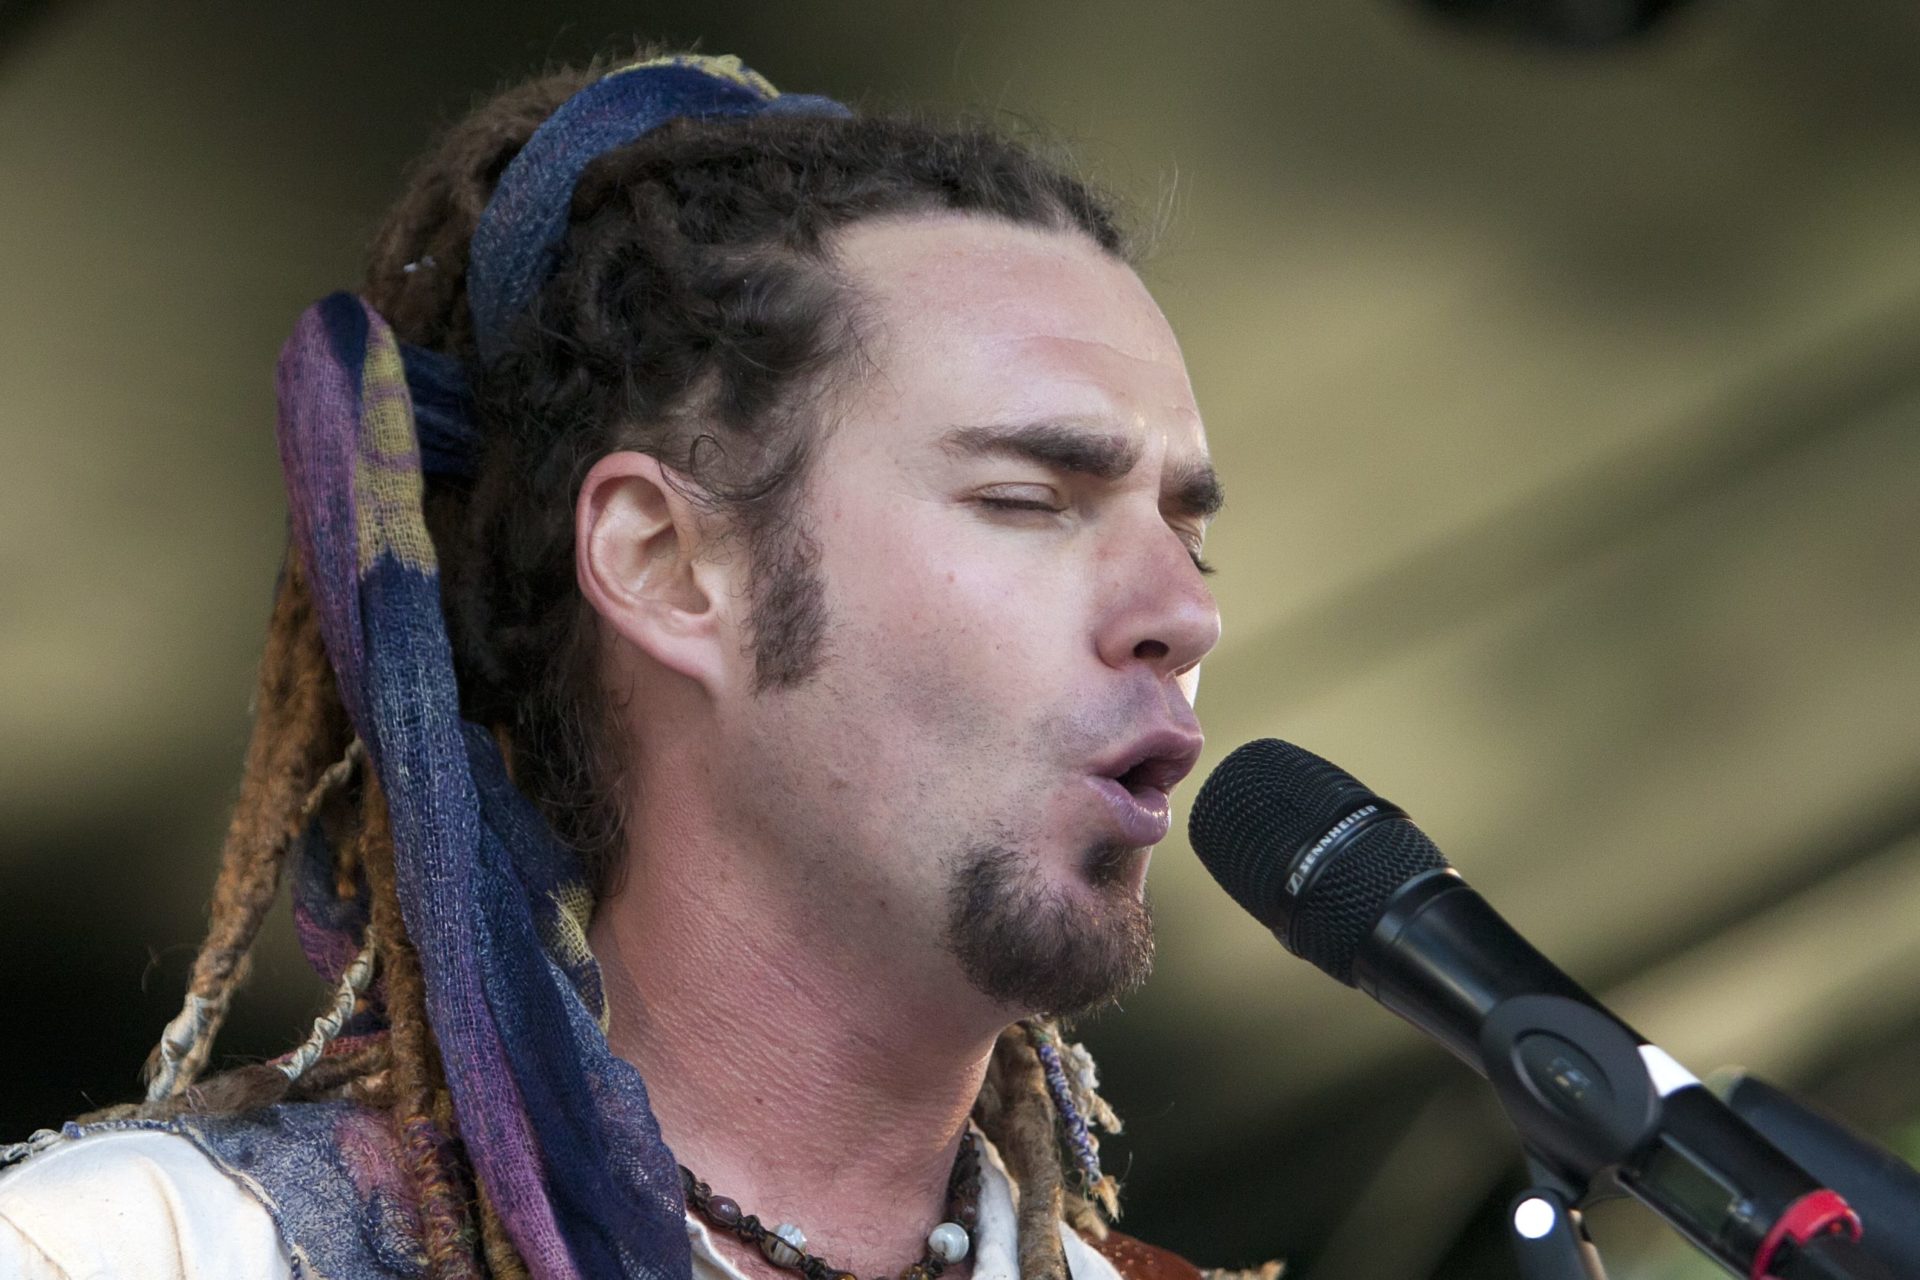 Jay Hoad Band @ Womad, March ’12